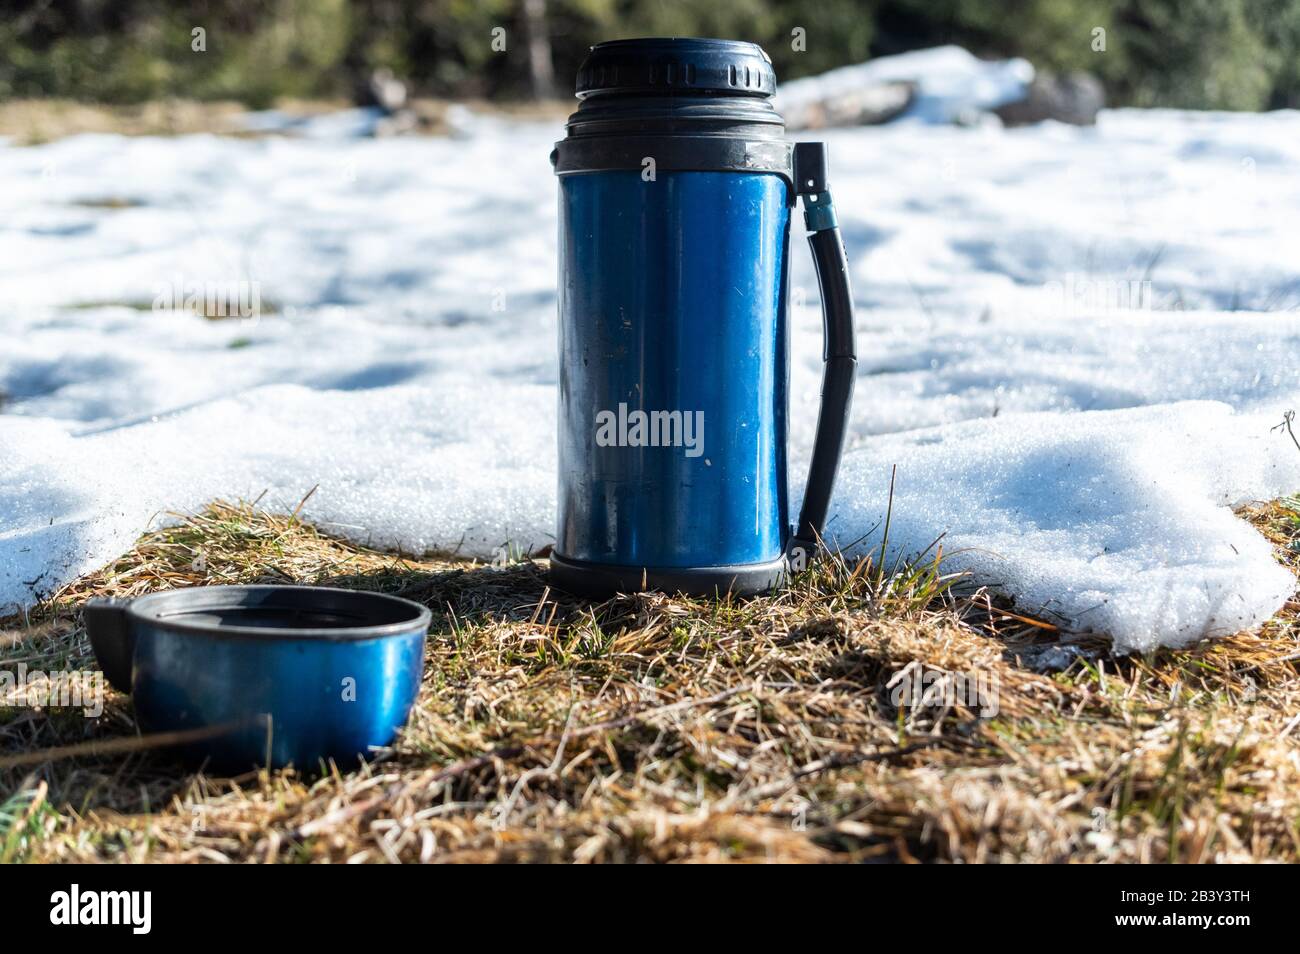 https://c8.alamy.com/comp/2B3Y3TH/thermos-camping-thermos-for-tourism-thermos-in-nature-2B3Y3TH.jpg